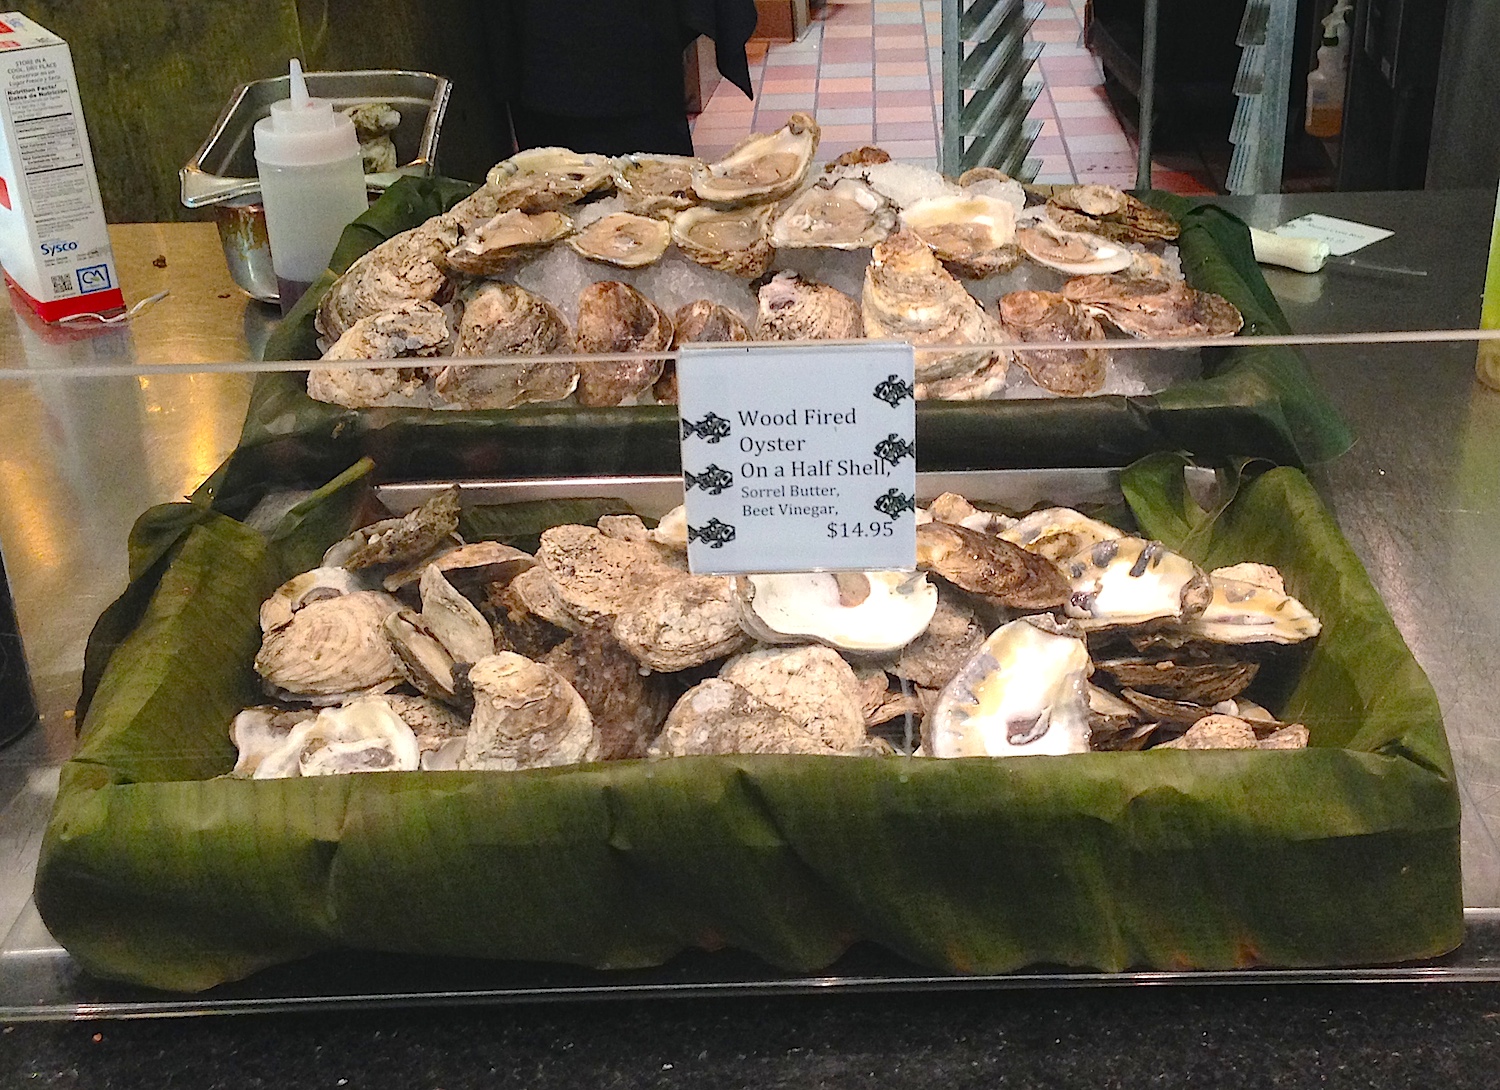 Oysters. In a Cafeteria. Awesome.